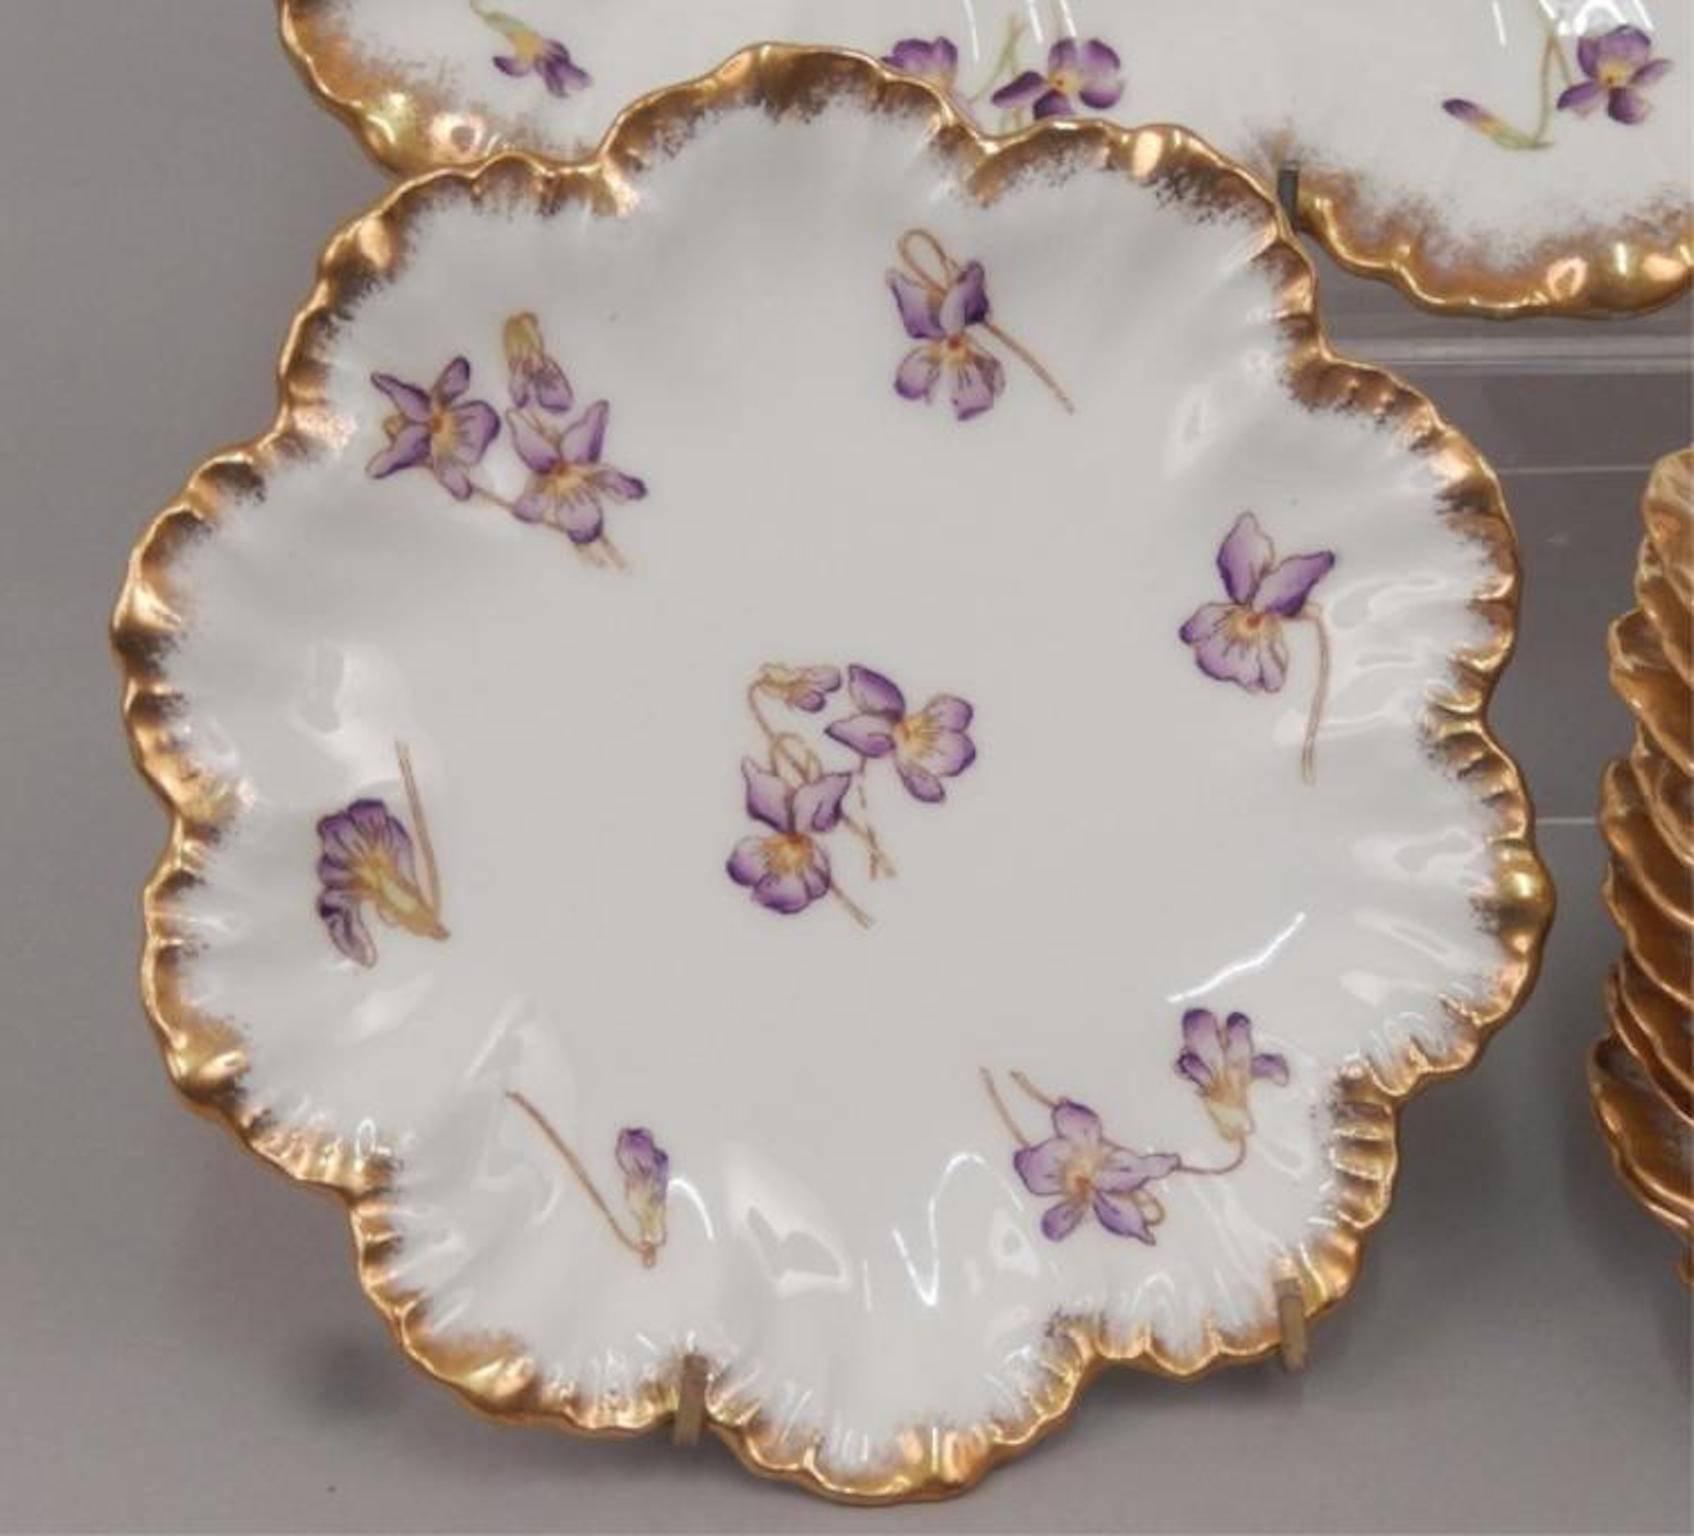 Limoges France porcelain ice cream set, including tray, 15 1/2" x 9" x 2 3/4" and 12 7" plates, all with gilt edge and violet pattern, early 20th century.